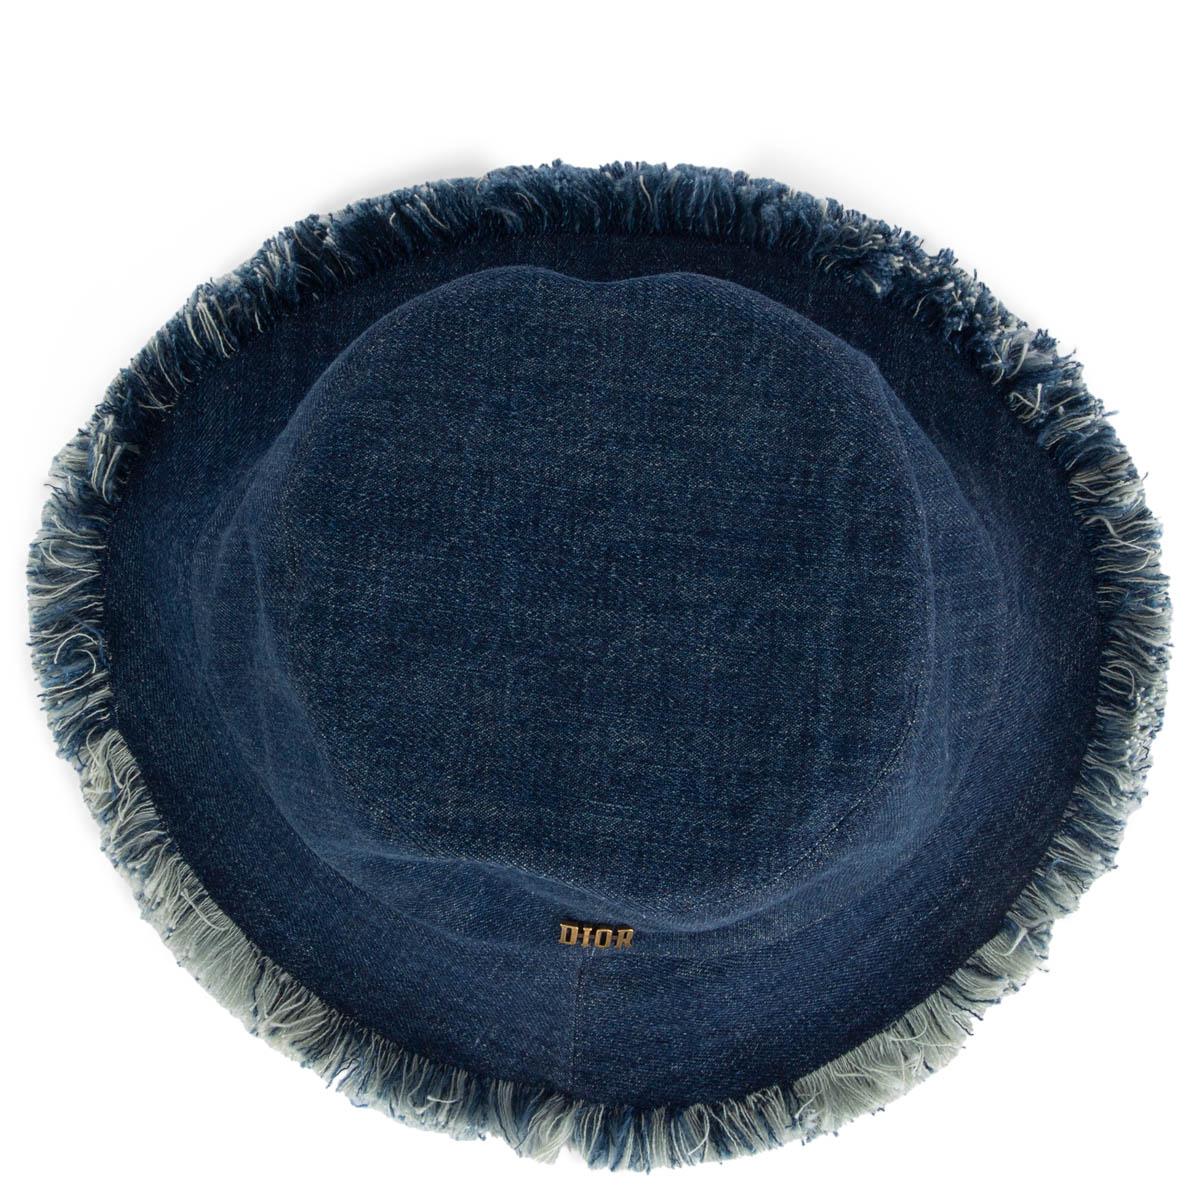 100% authentic Christian Dior 2022 frayed blue denim bucket hat in cotton (100%). Has been worn and is in excellent condition. 

Measurements
Tag Size	Missing Tag 
Size	S/M
Inside Circumference	55cm (21.5in)

All our listings include only the listed